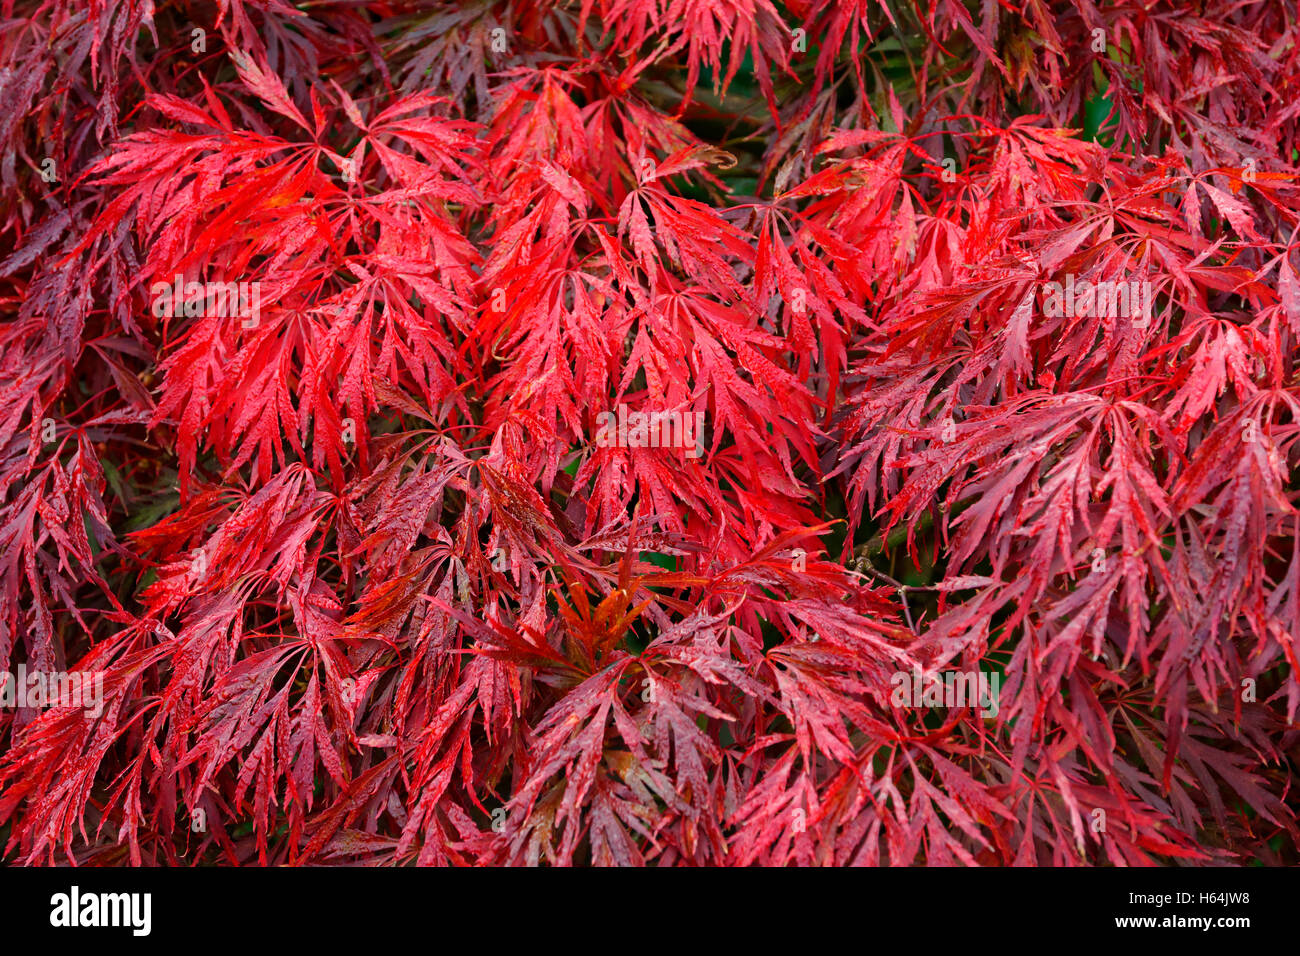 Japanese Maple (Acer Palmatum) tree in early autumn prior to leaf fall. Stock Photo